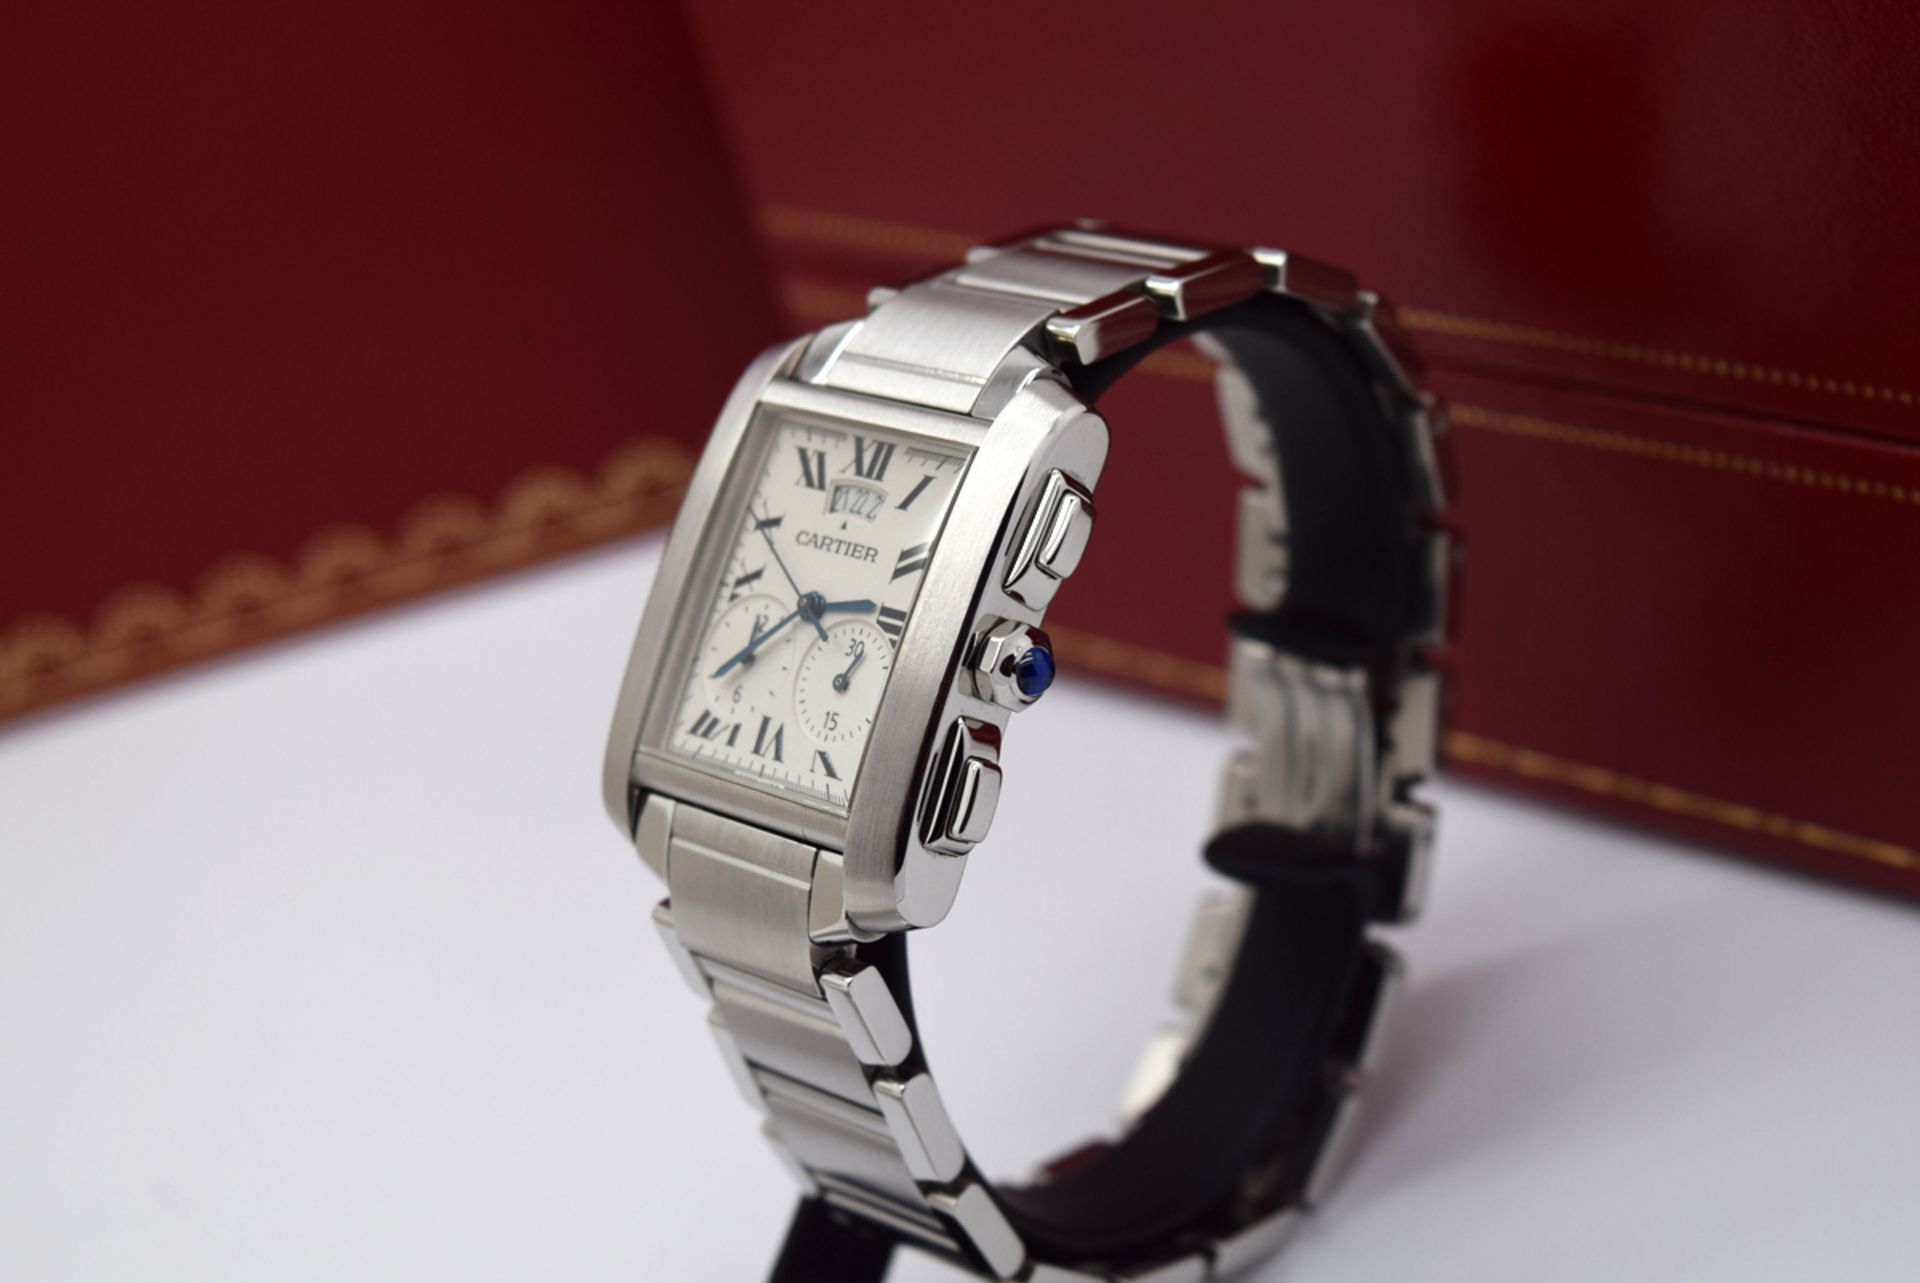 MENS CARTIER CHRONOGRAPH - STAINLESS STEEL TANK (2653 - W51024Q3) - Image 9 of 12